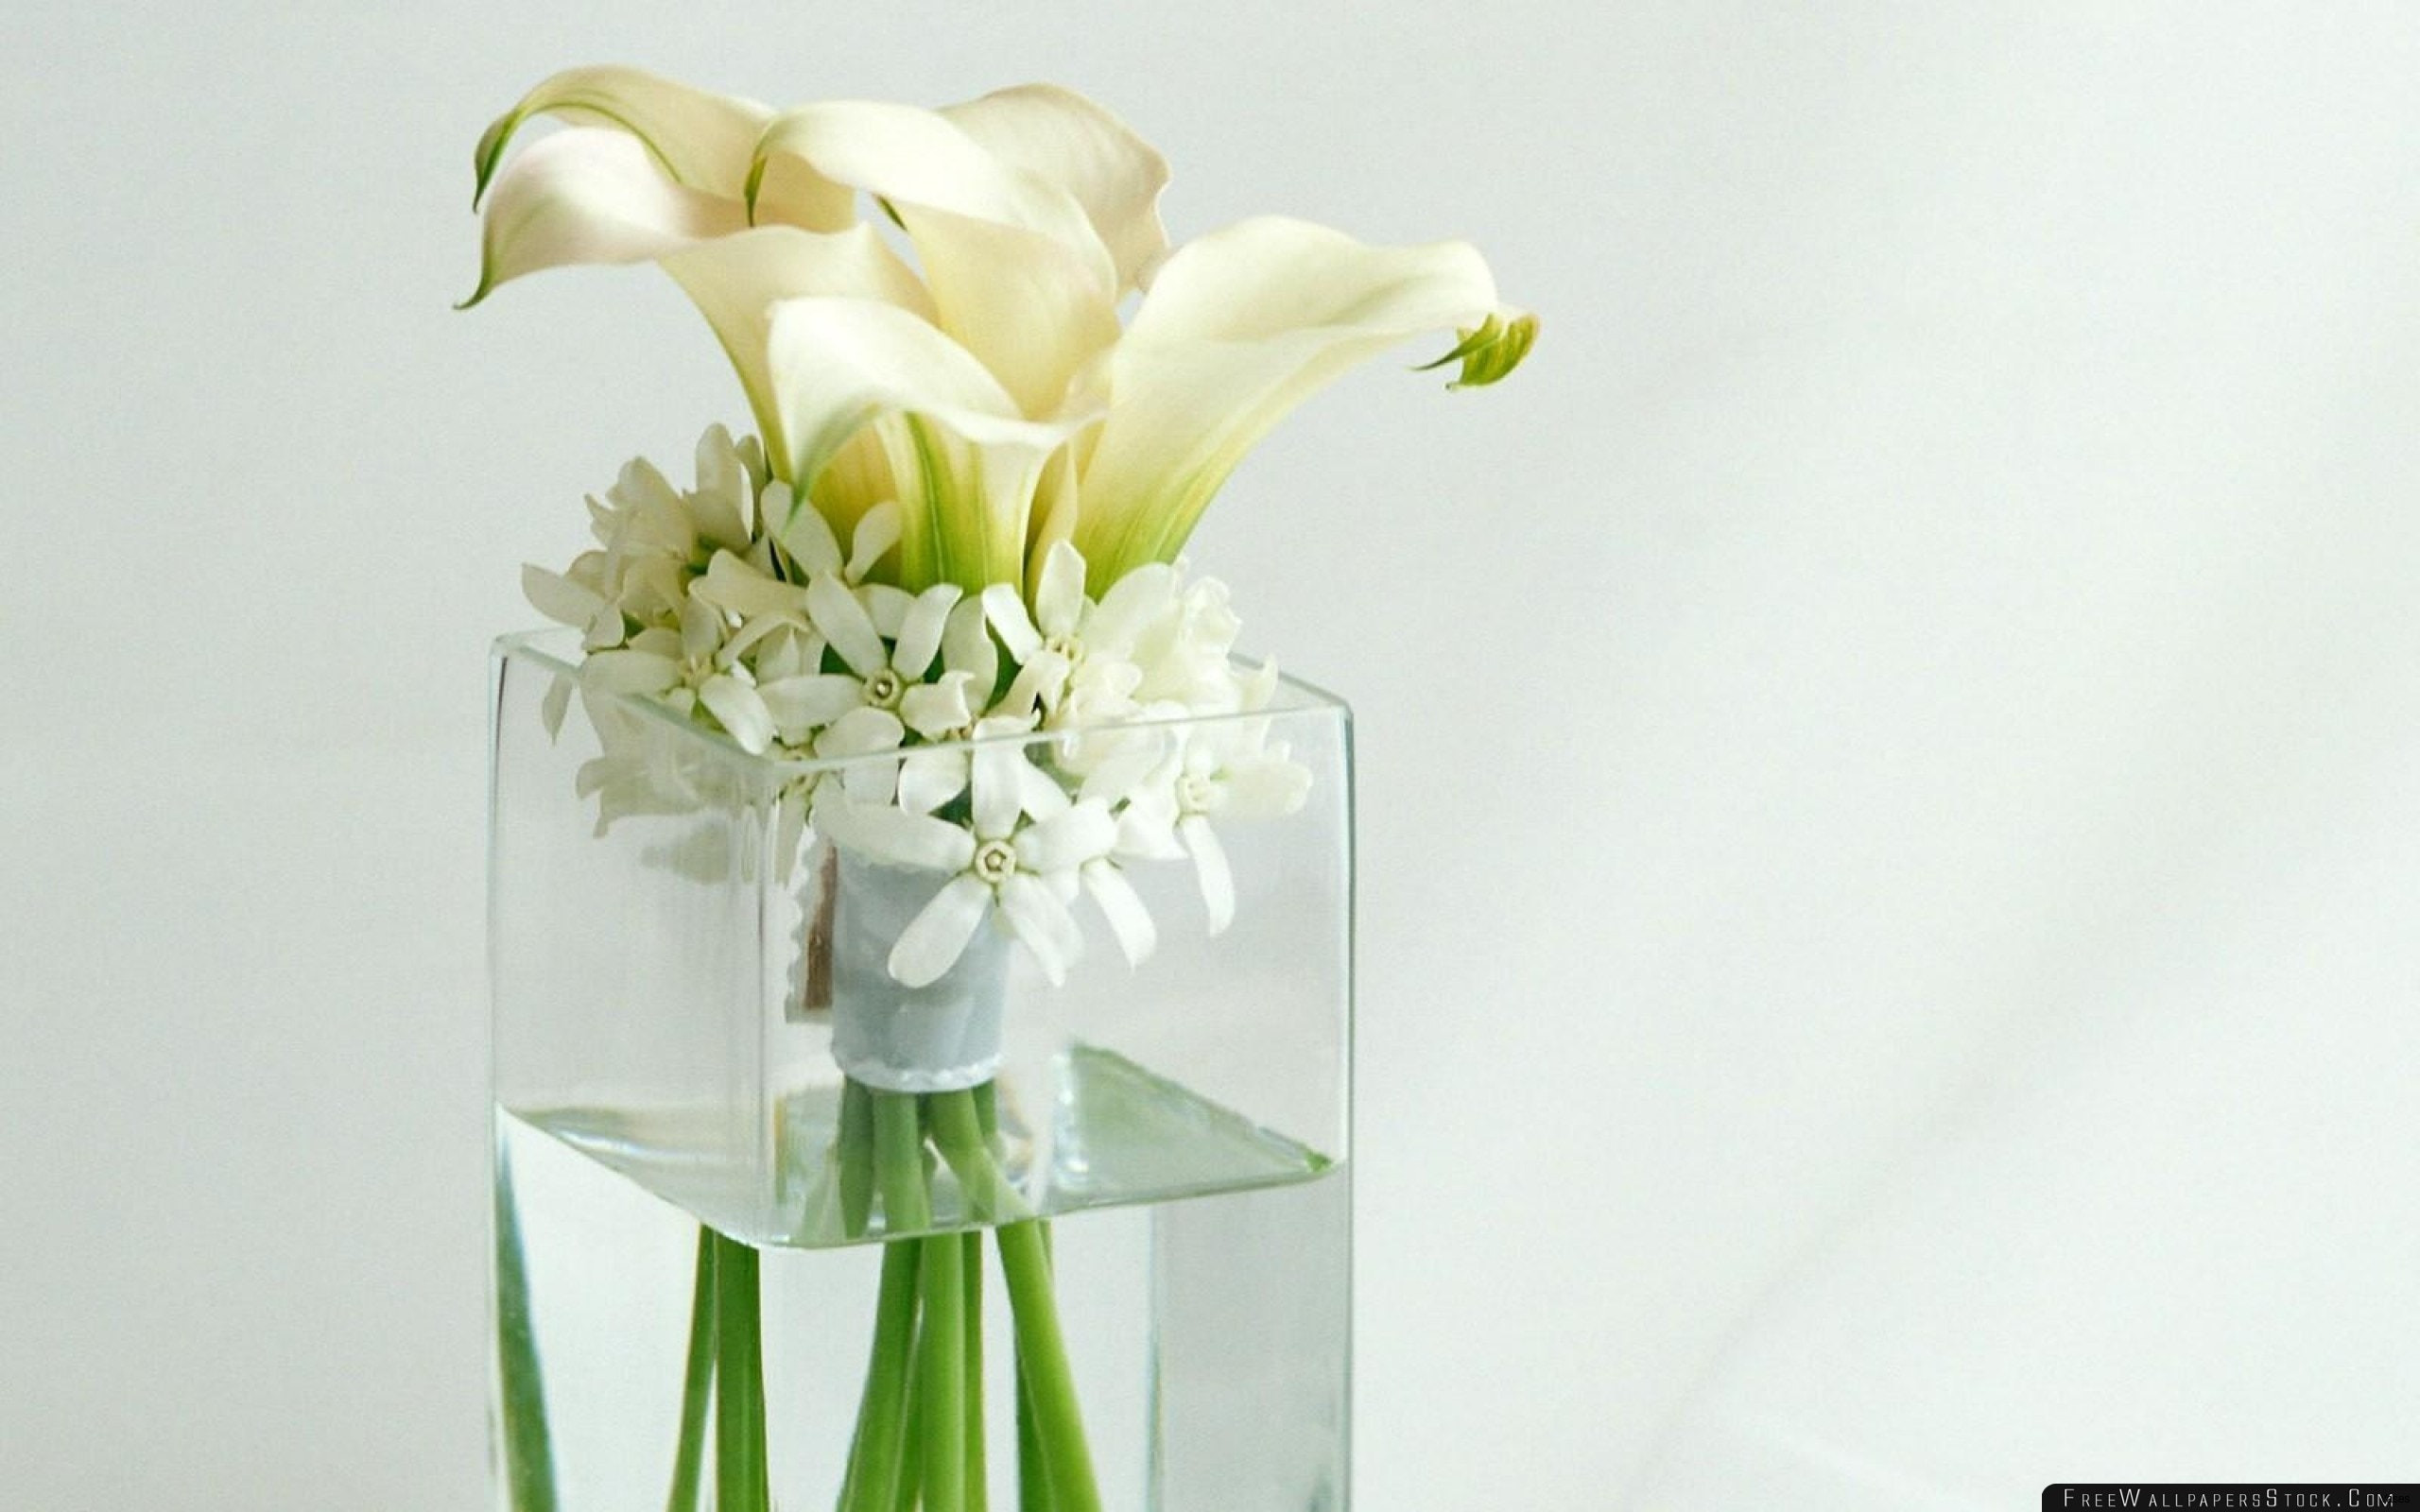 22 Recommended Small Vase Decorating Ideas 2024 free download small vase decorating ideas of small bud vase pictures wedding flowers wonderful h vases bud vase in small bud vase collection decorating ideas for vases elegant il fullxfull nny9h vases flo